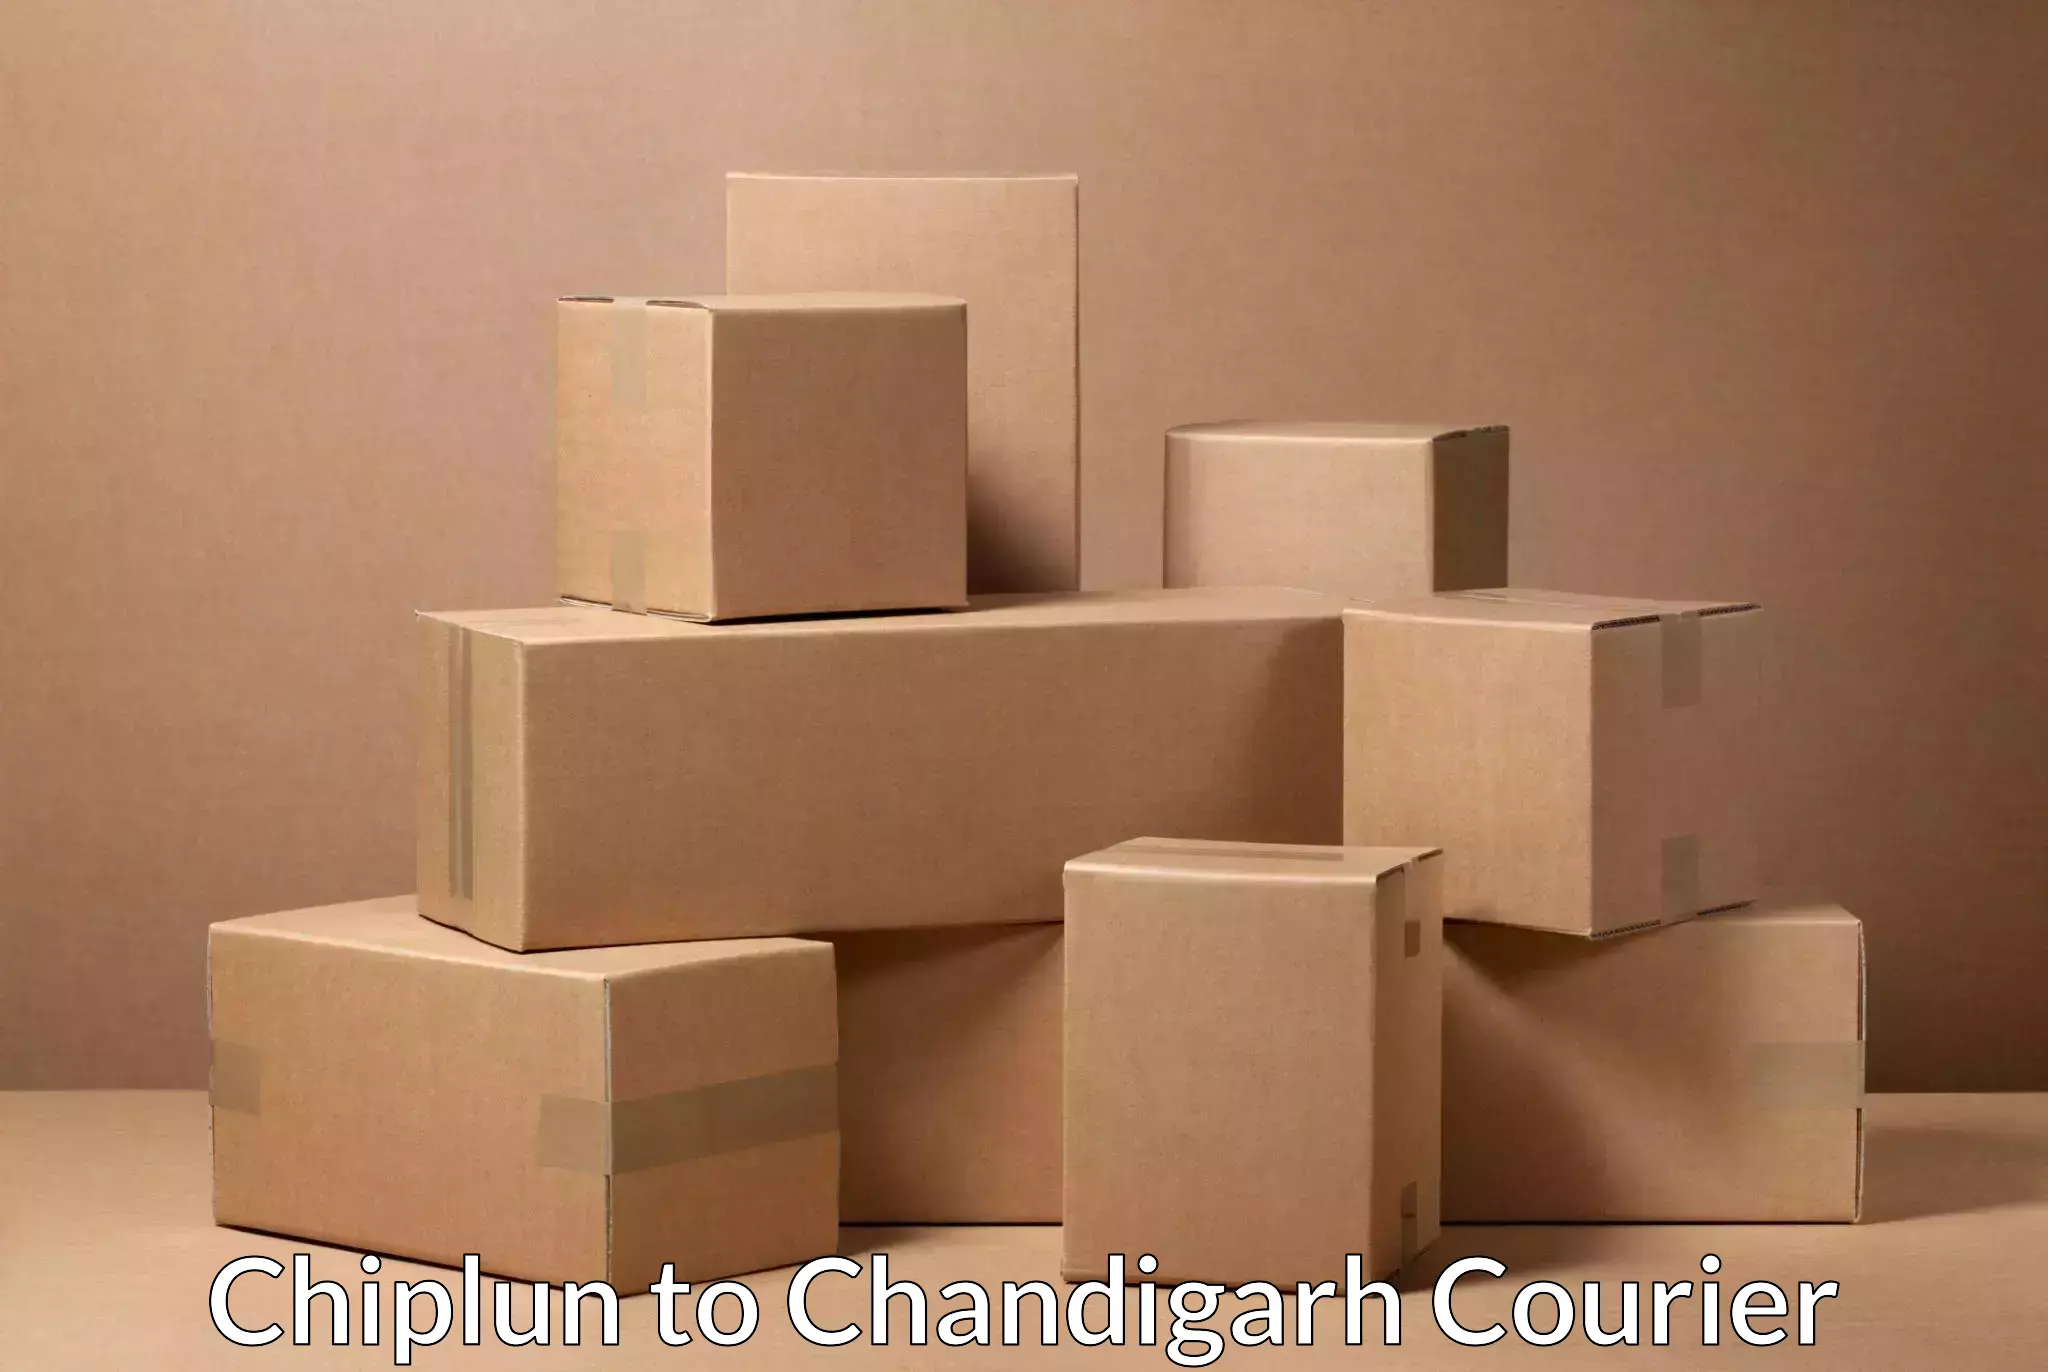 Quality courier partnerships Chiplun to Chandigarh